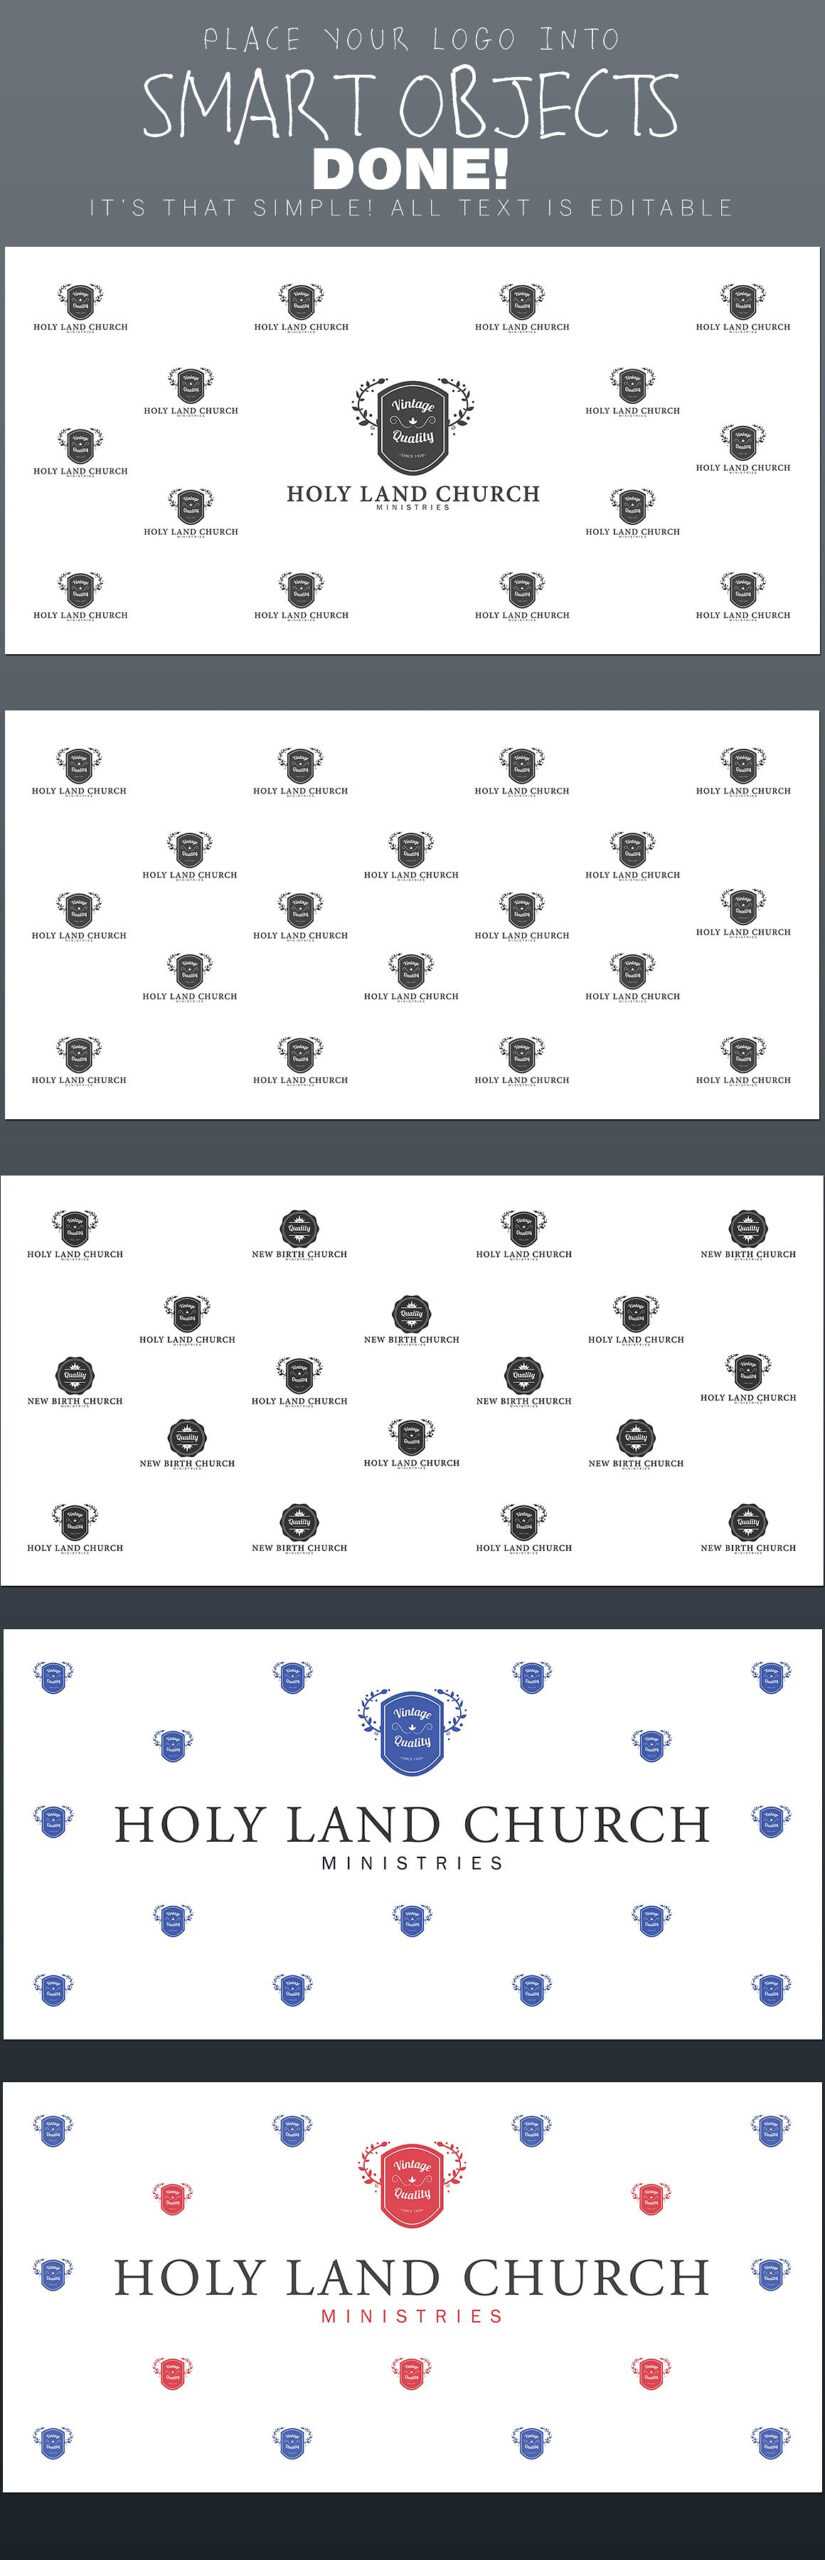 Step And Repeat Backdrop Photoshop Template In Step And Repeat Banner Template